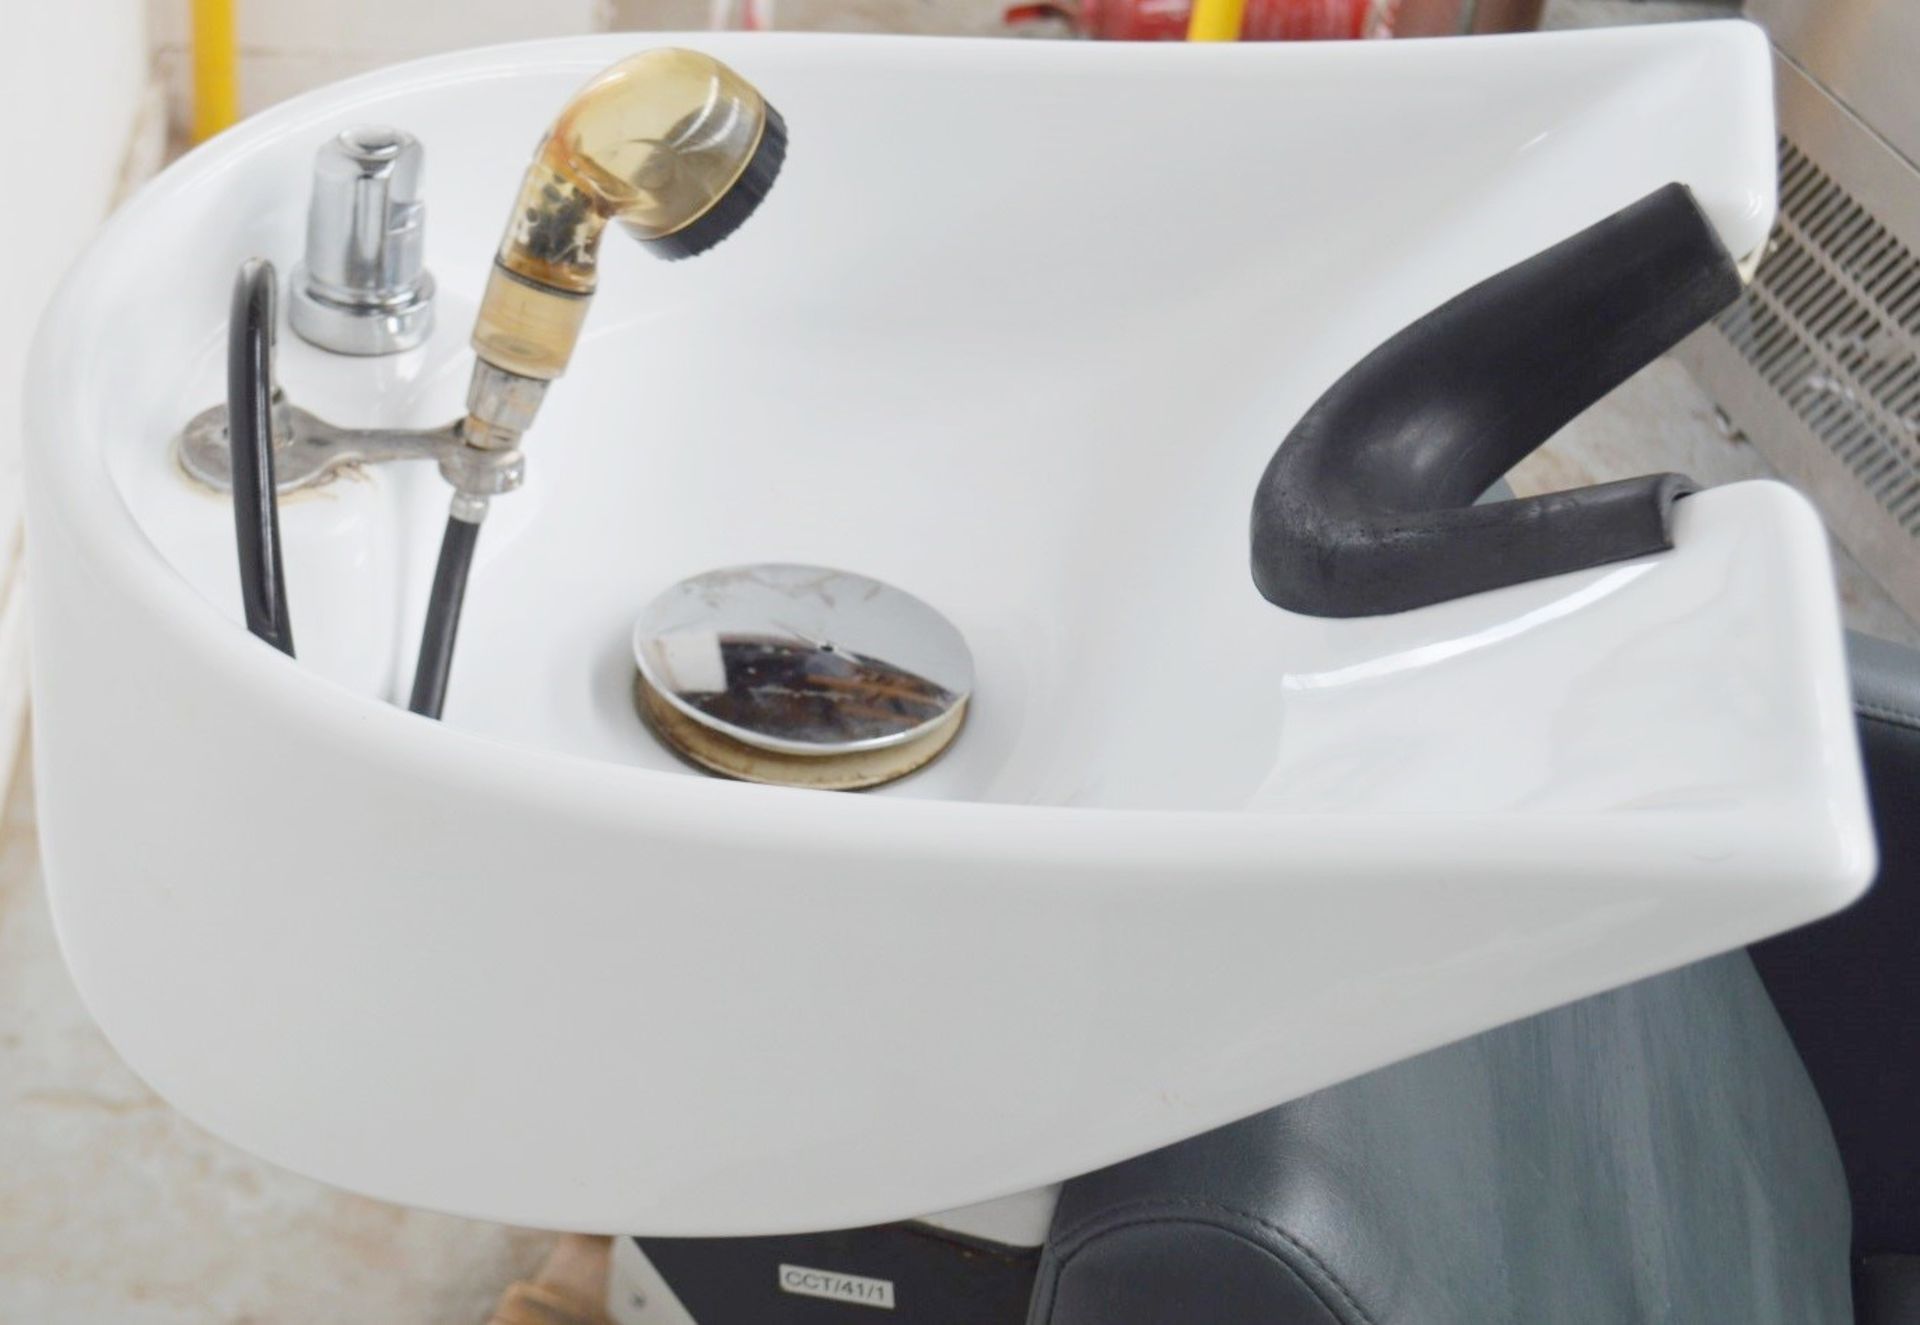 1 x Professional Reclining Hair Washing Chair With Basin Shower And Foot Rest - Image 11 of 19